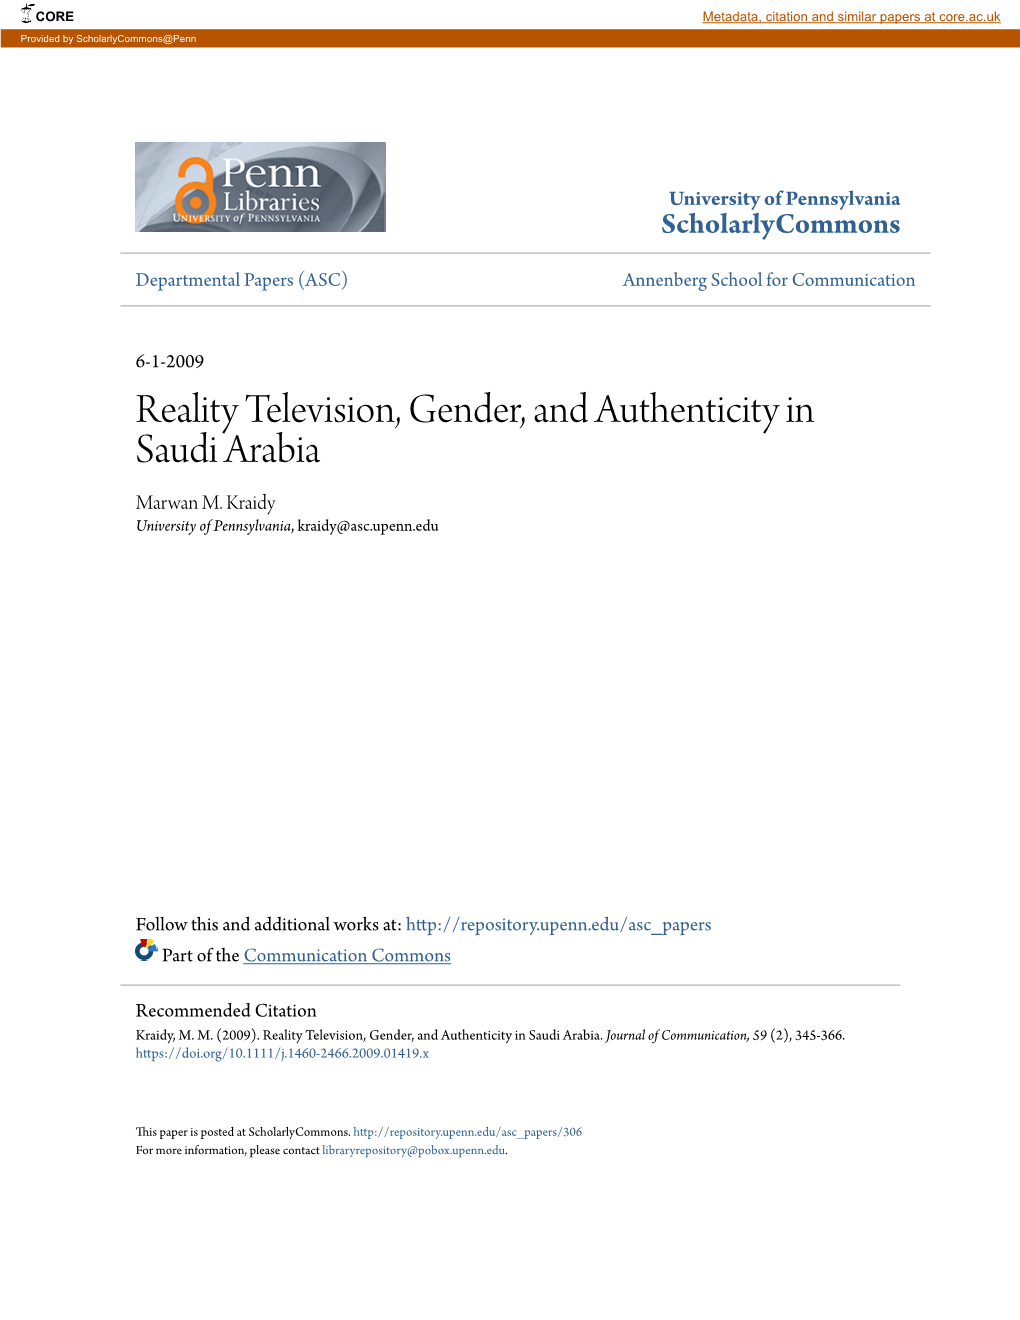 Reality Television, Gender, and Authenticity in Saudi Arabia Marwan M